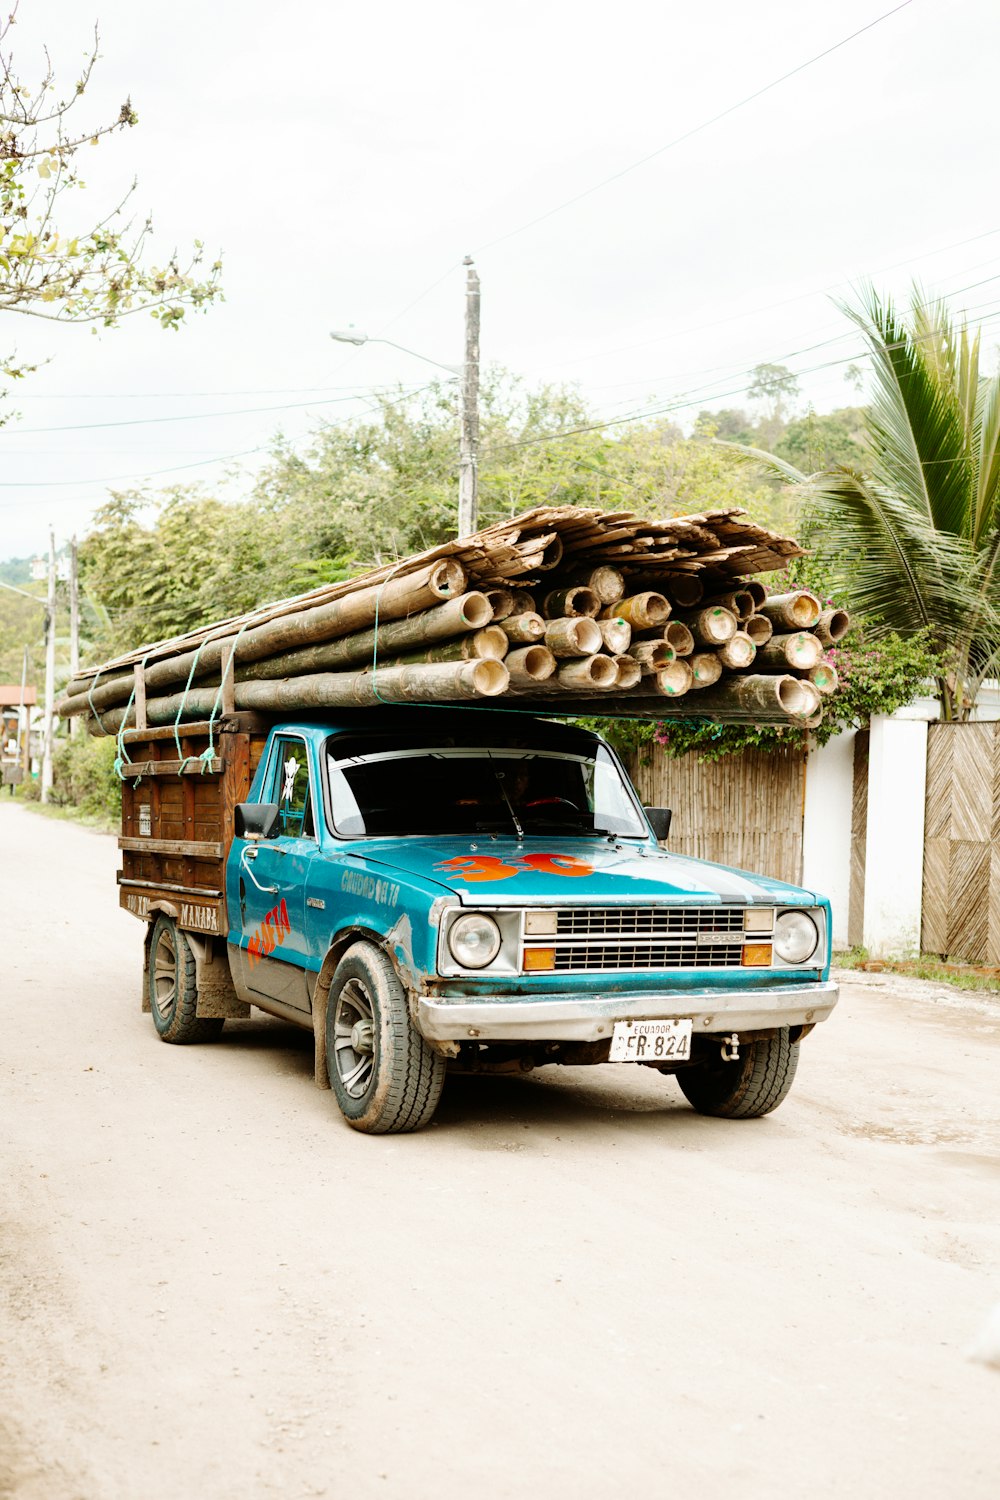 a truck with a pile of logs on the back